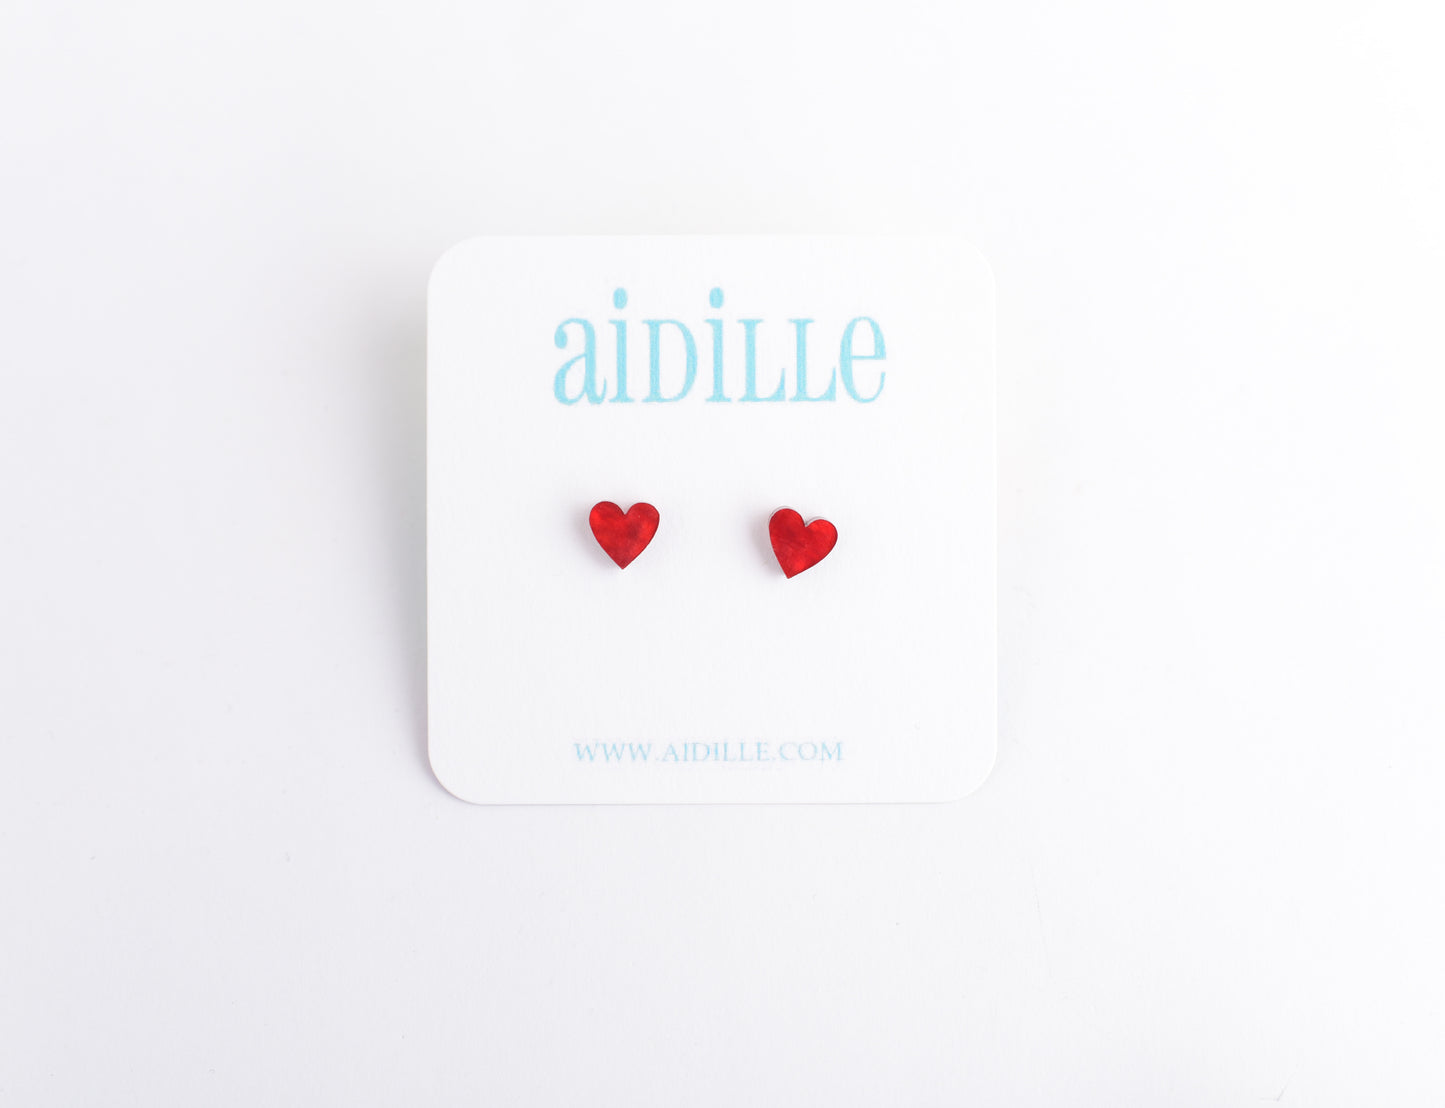 Mini 8mm Heart Earrings with Titanium Posts- Red or Hot Pink